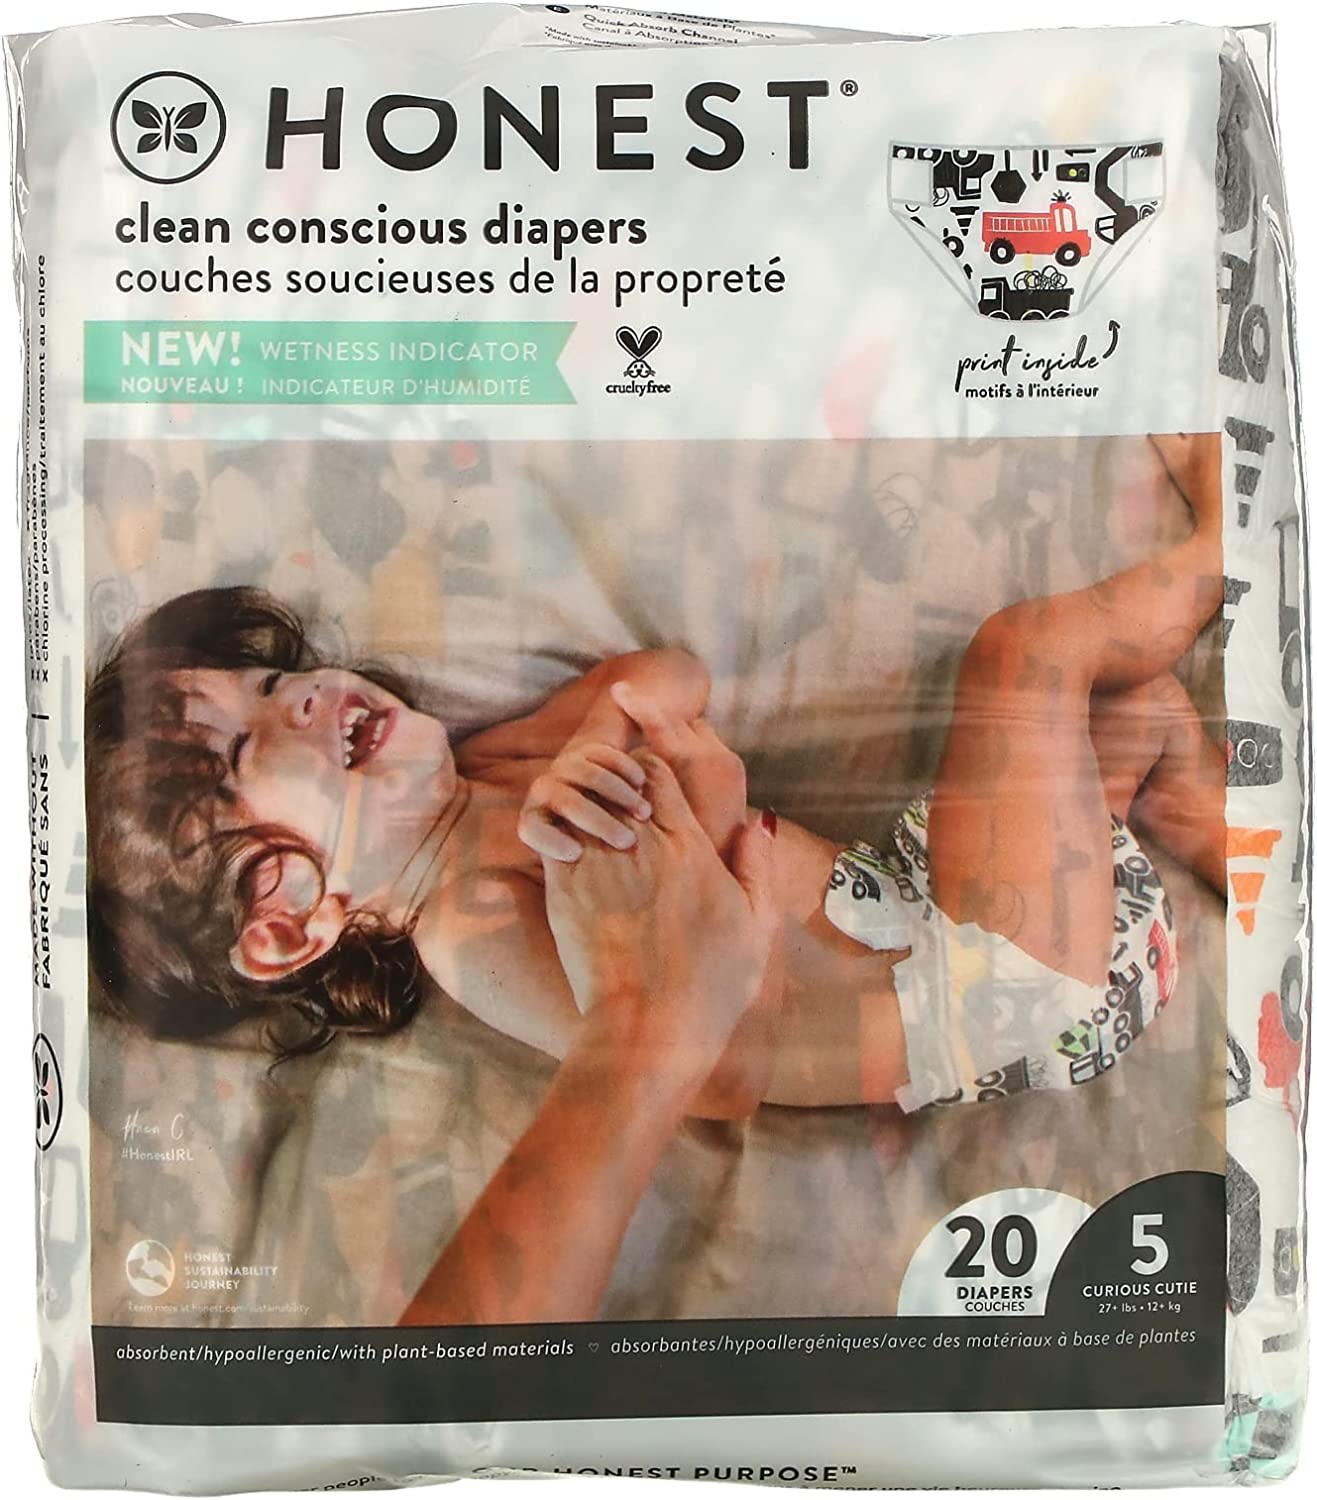 THE HONEST COMPANY Big Trucks Size 5 Diapers, 20 CT